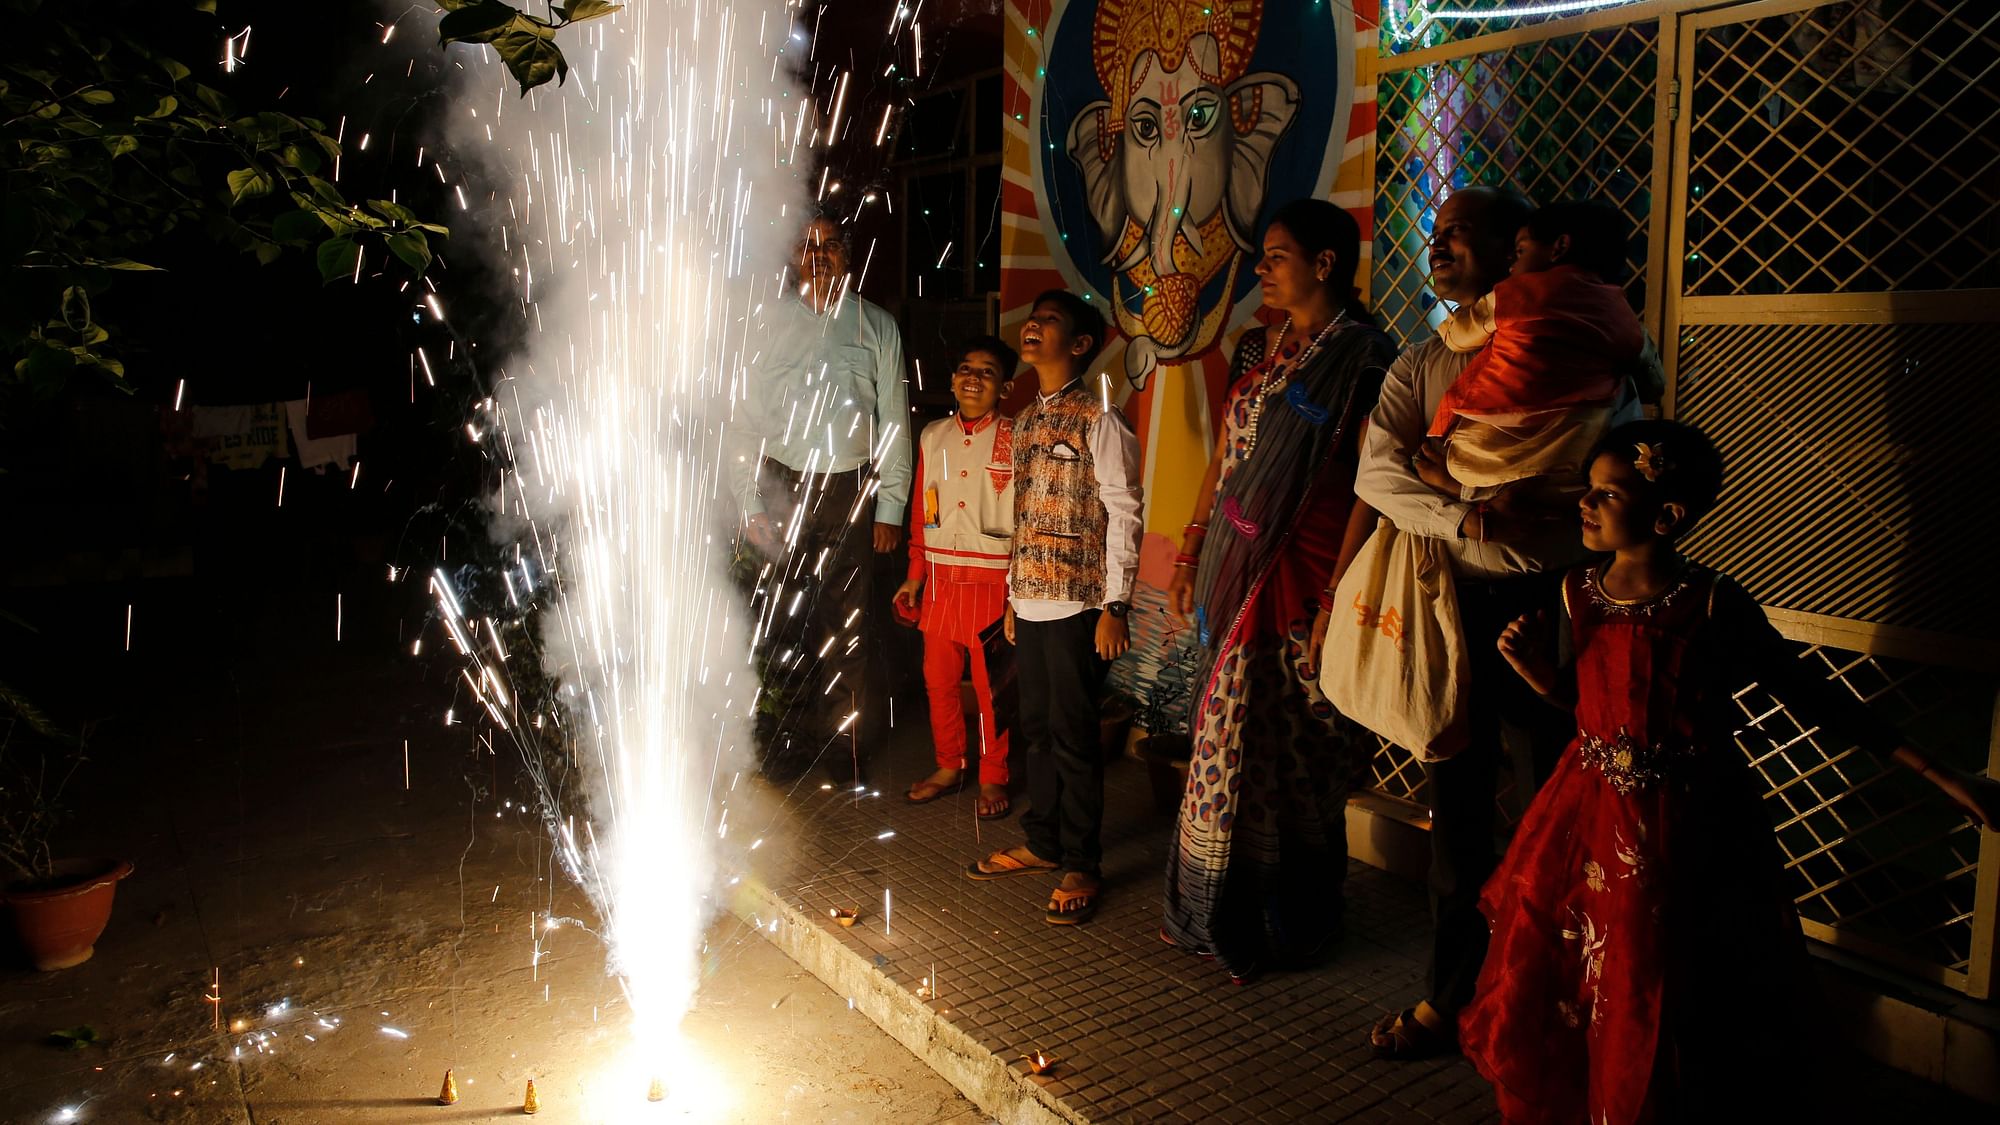 A family bursts firecrackers as part of Diwali celebrations.